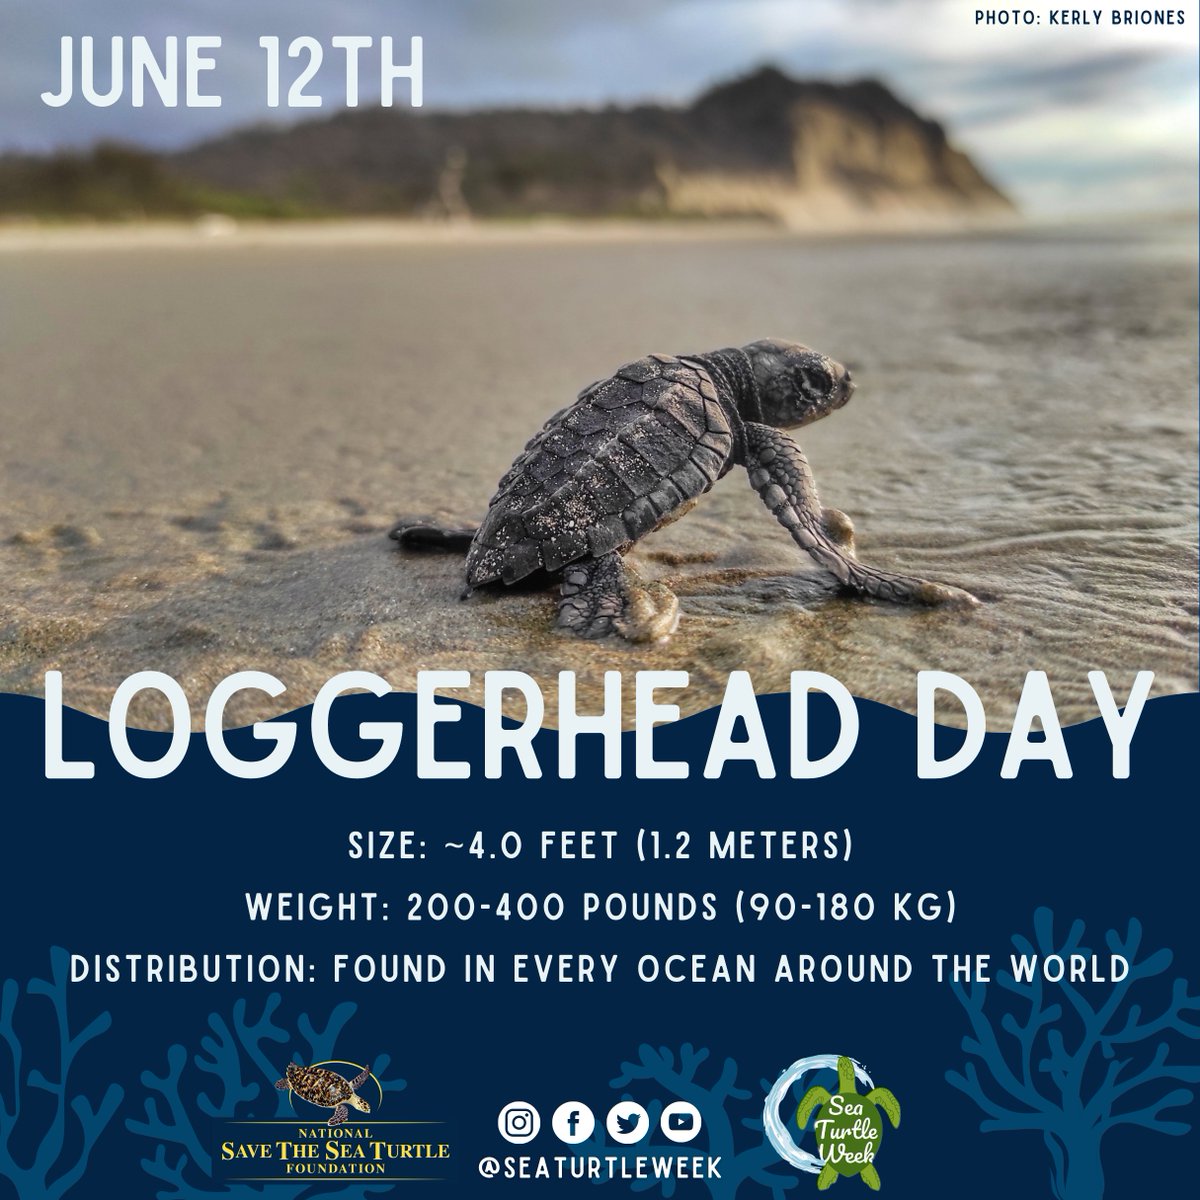 June 12th is Loggerhead Turtle Day! 💛

Loggerheads are named for their large head and strong crushing jaw which enables them to eat hard-shelled prey such as crabs, conchs, and whelks.

Learn more about loggerheads here seaturtleweek.com/loggerhead-day

Photo: Kerly Brione
#seaturtleweek